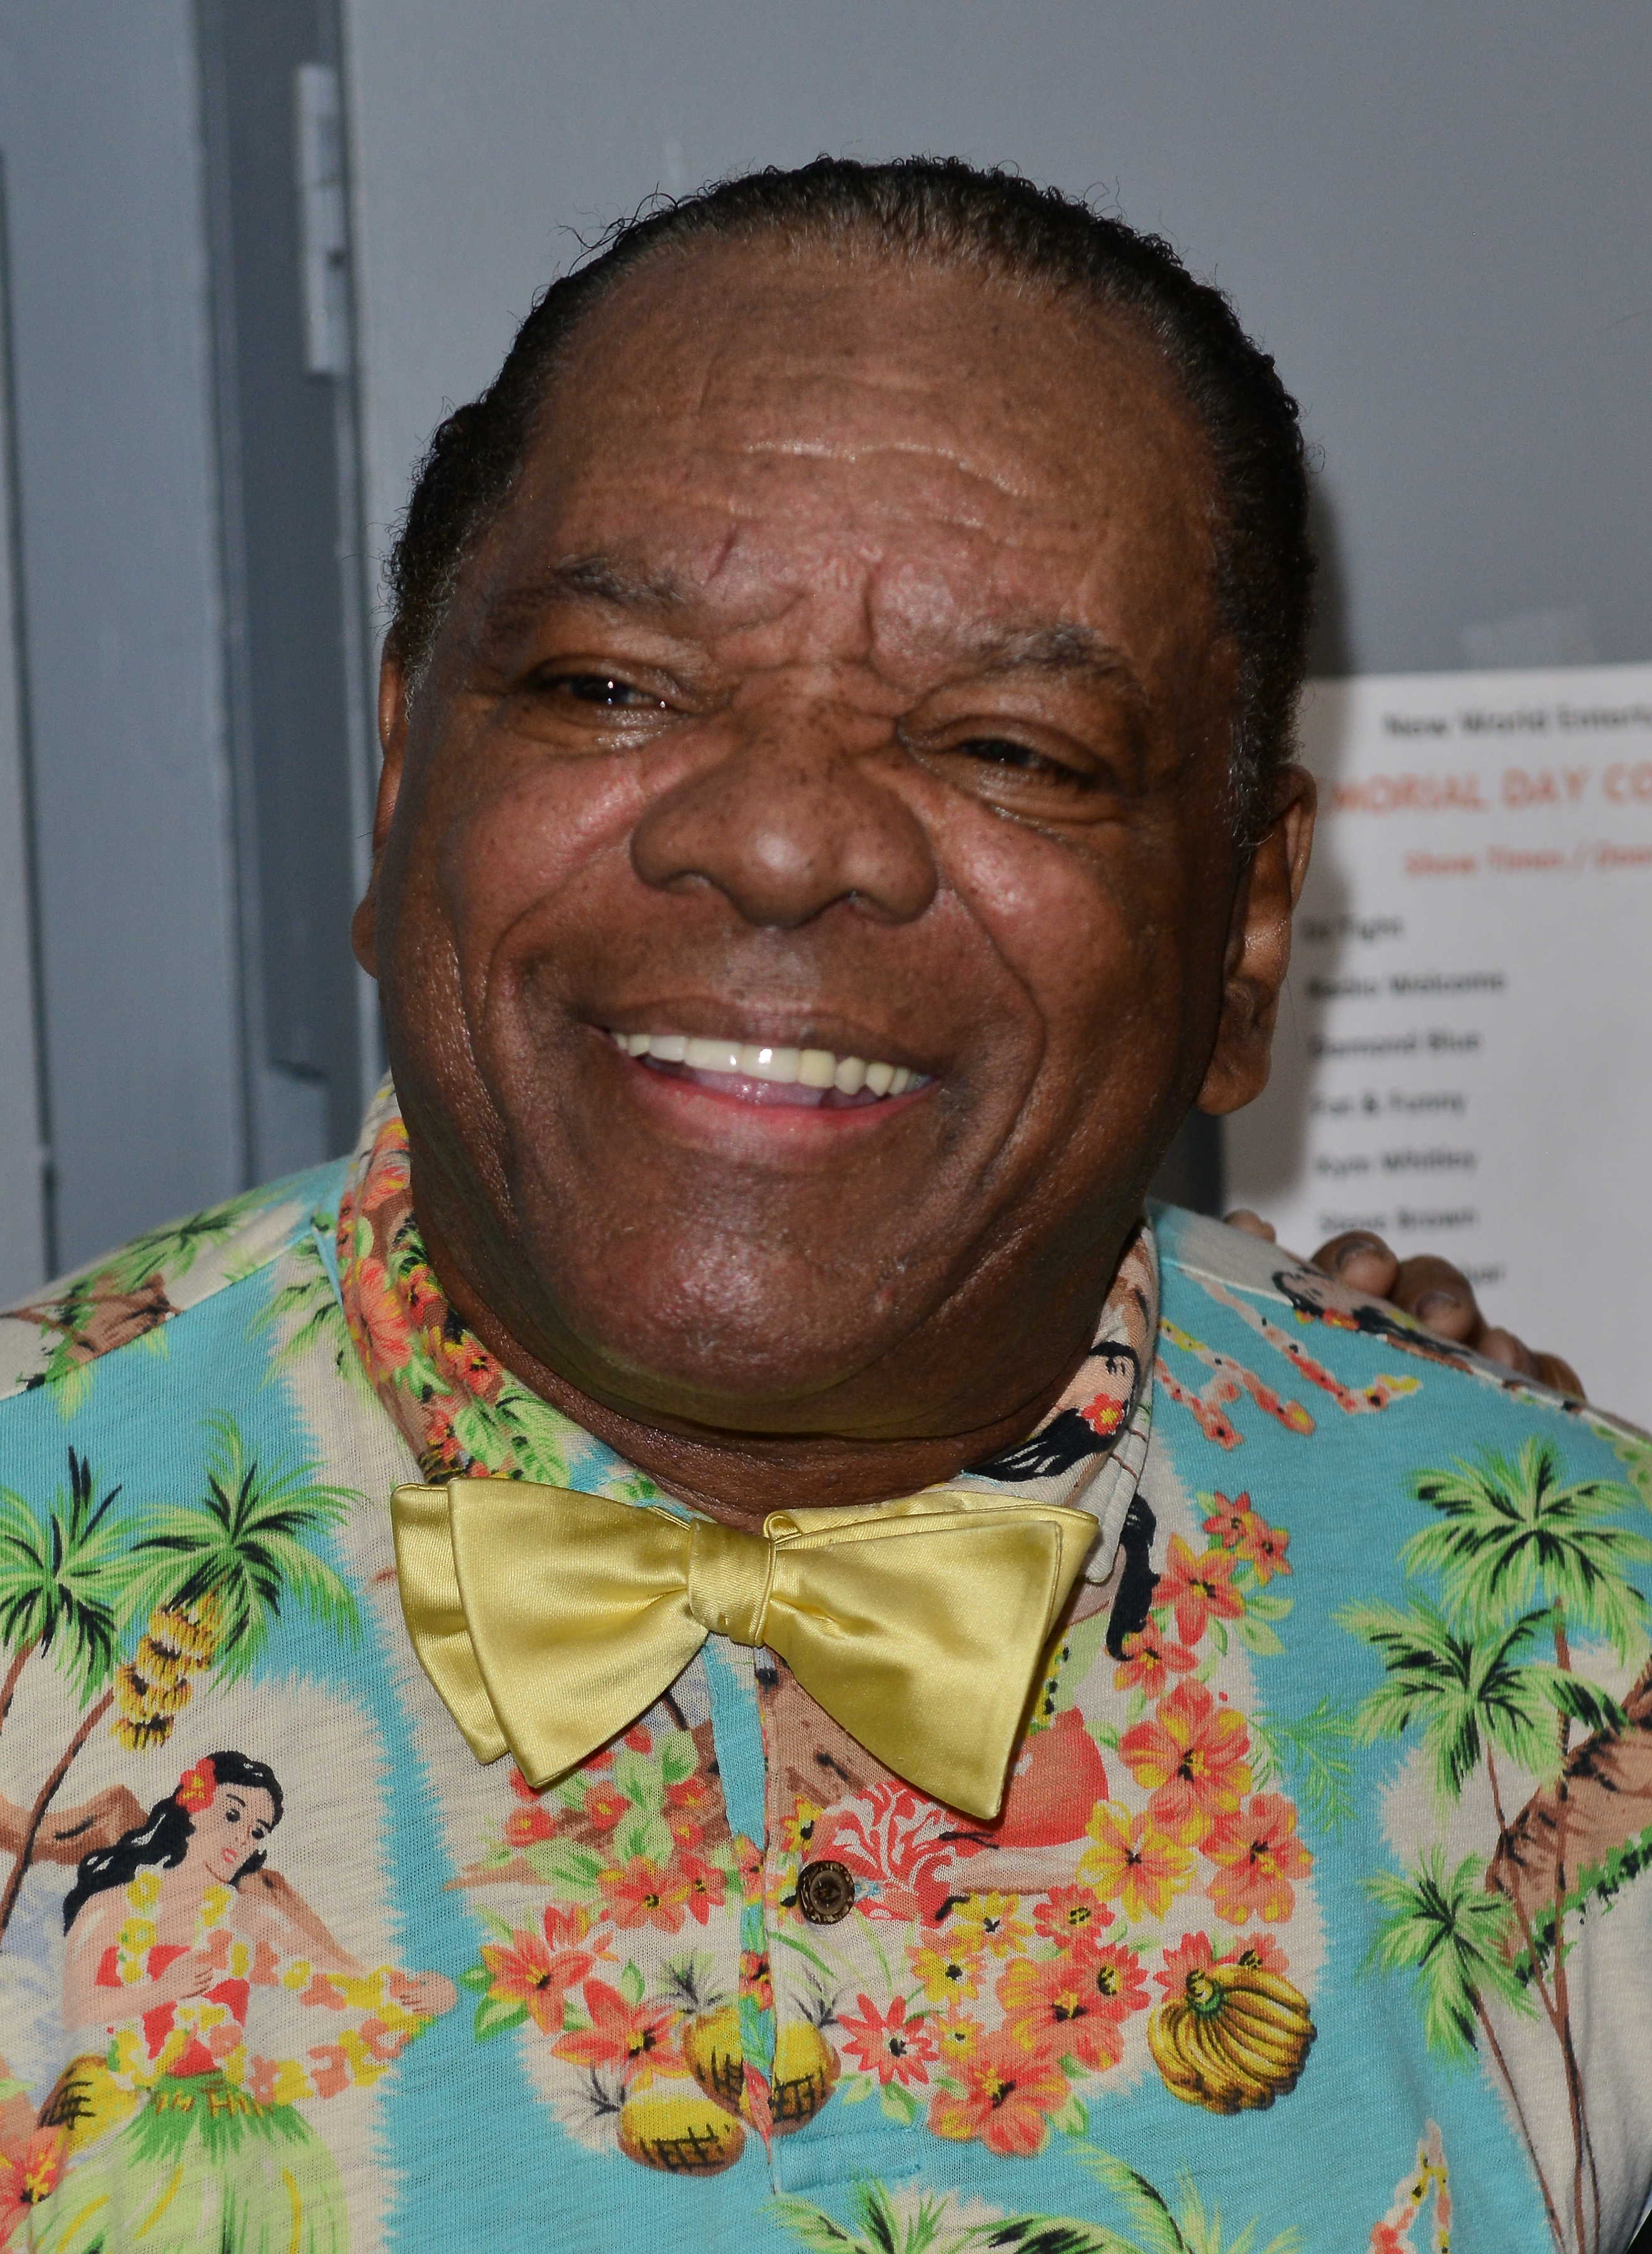 John "Pops" Witherspoon Sends Bill Cosby A